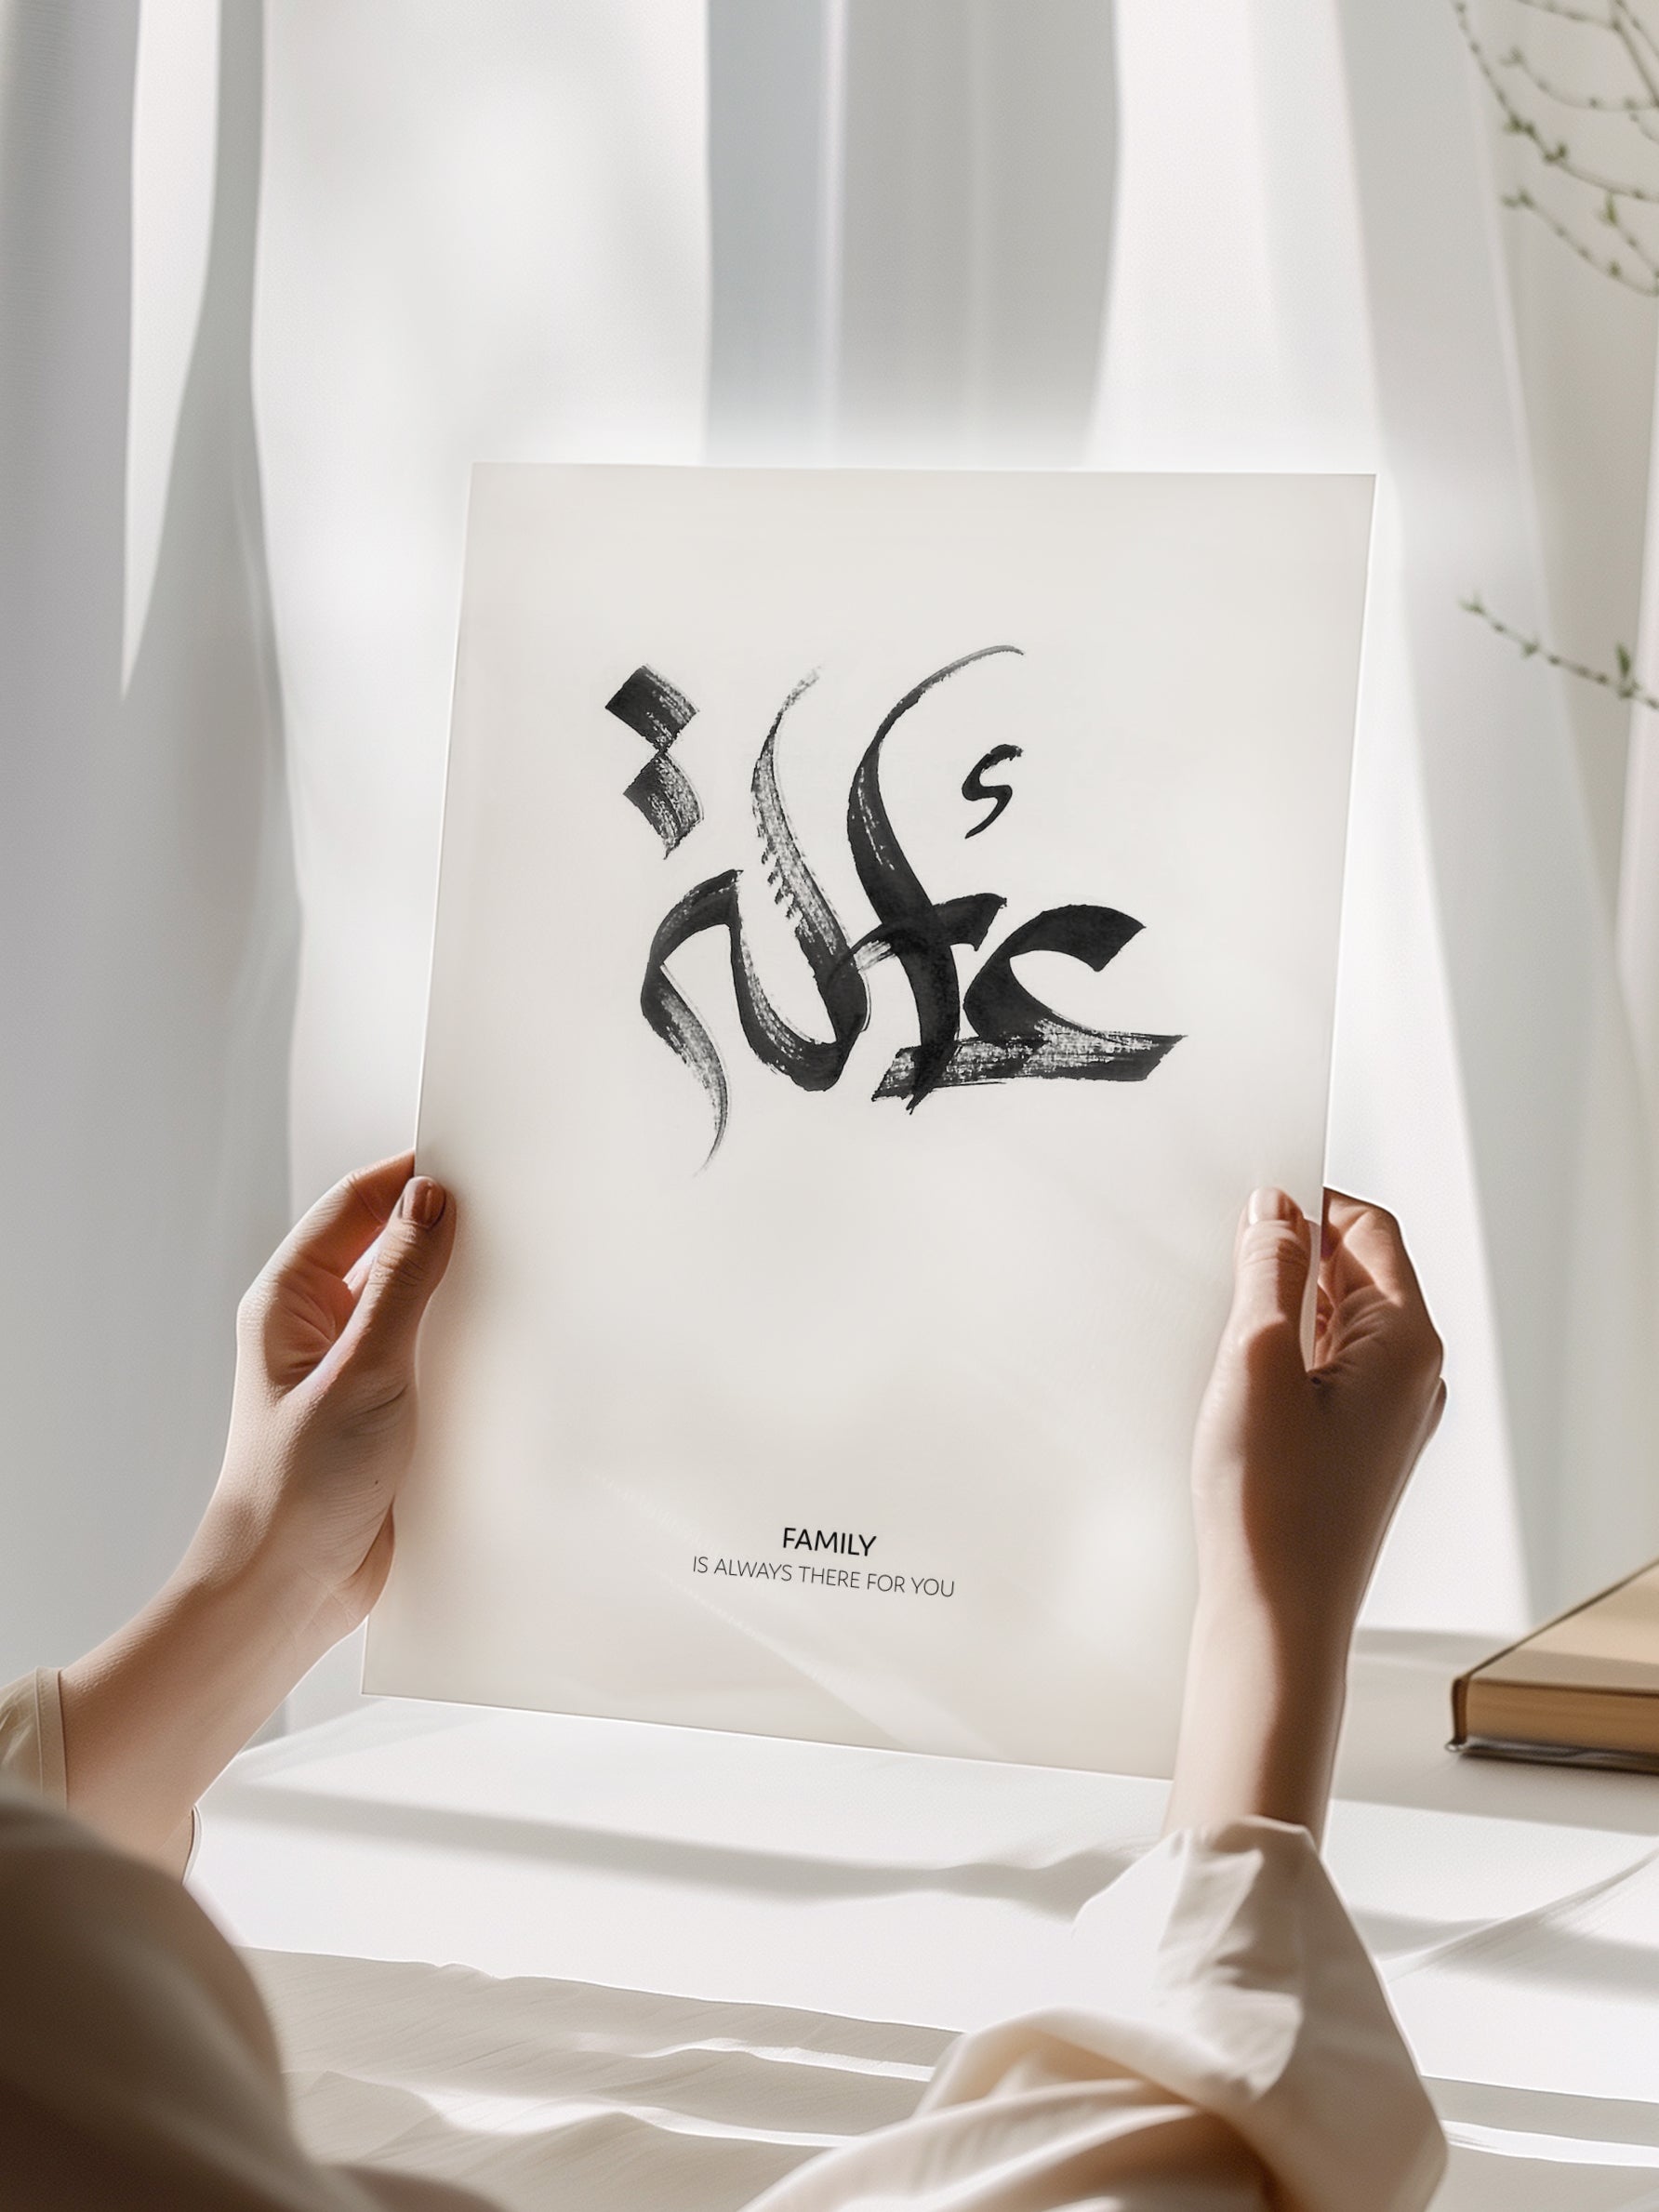 Family Calligraphy Poster